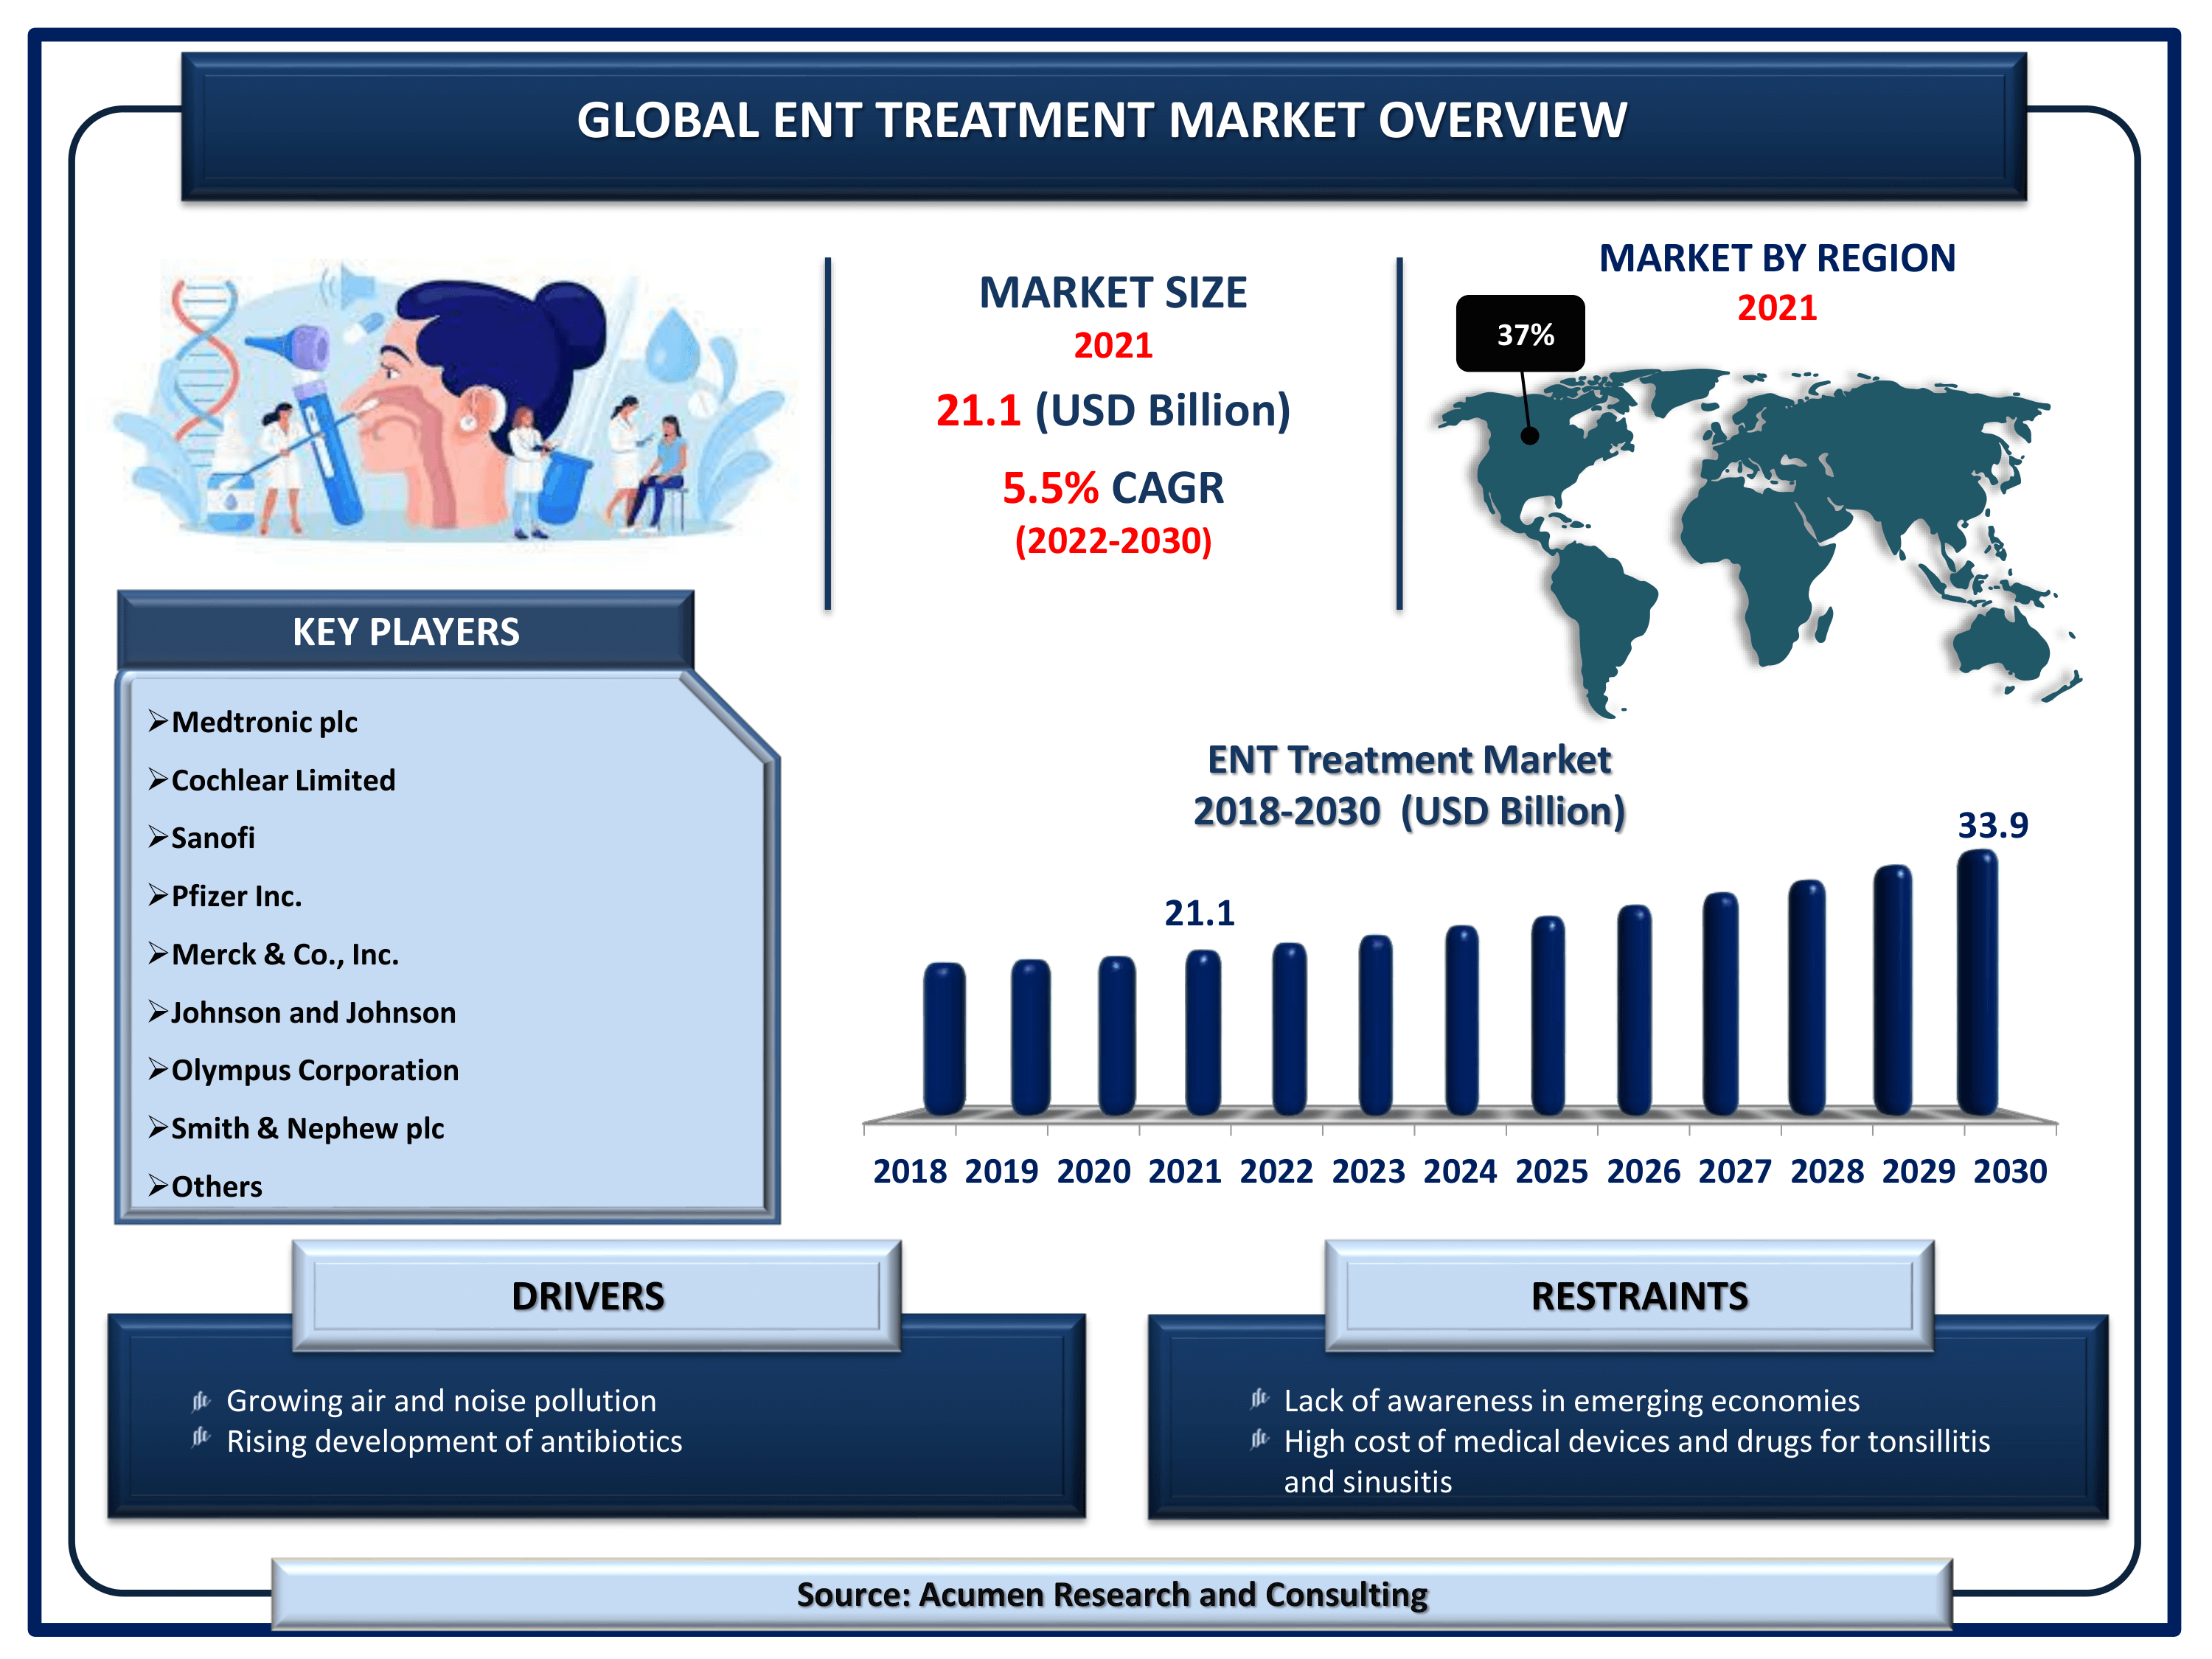 Global ENT treatment market revenue is estimated to reach USD 33.9 Billion by 2030 with a CAGR of 5.5% from 2022 to 2030